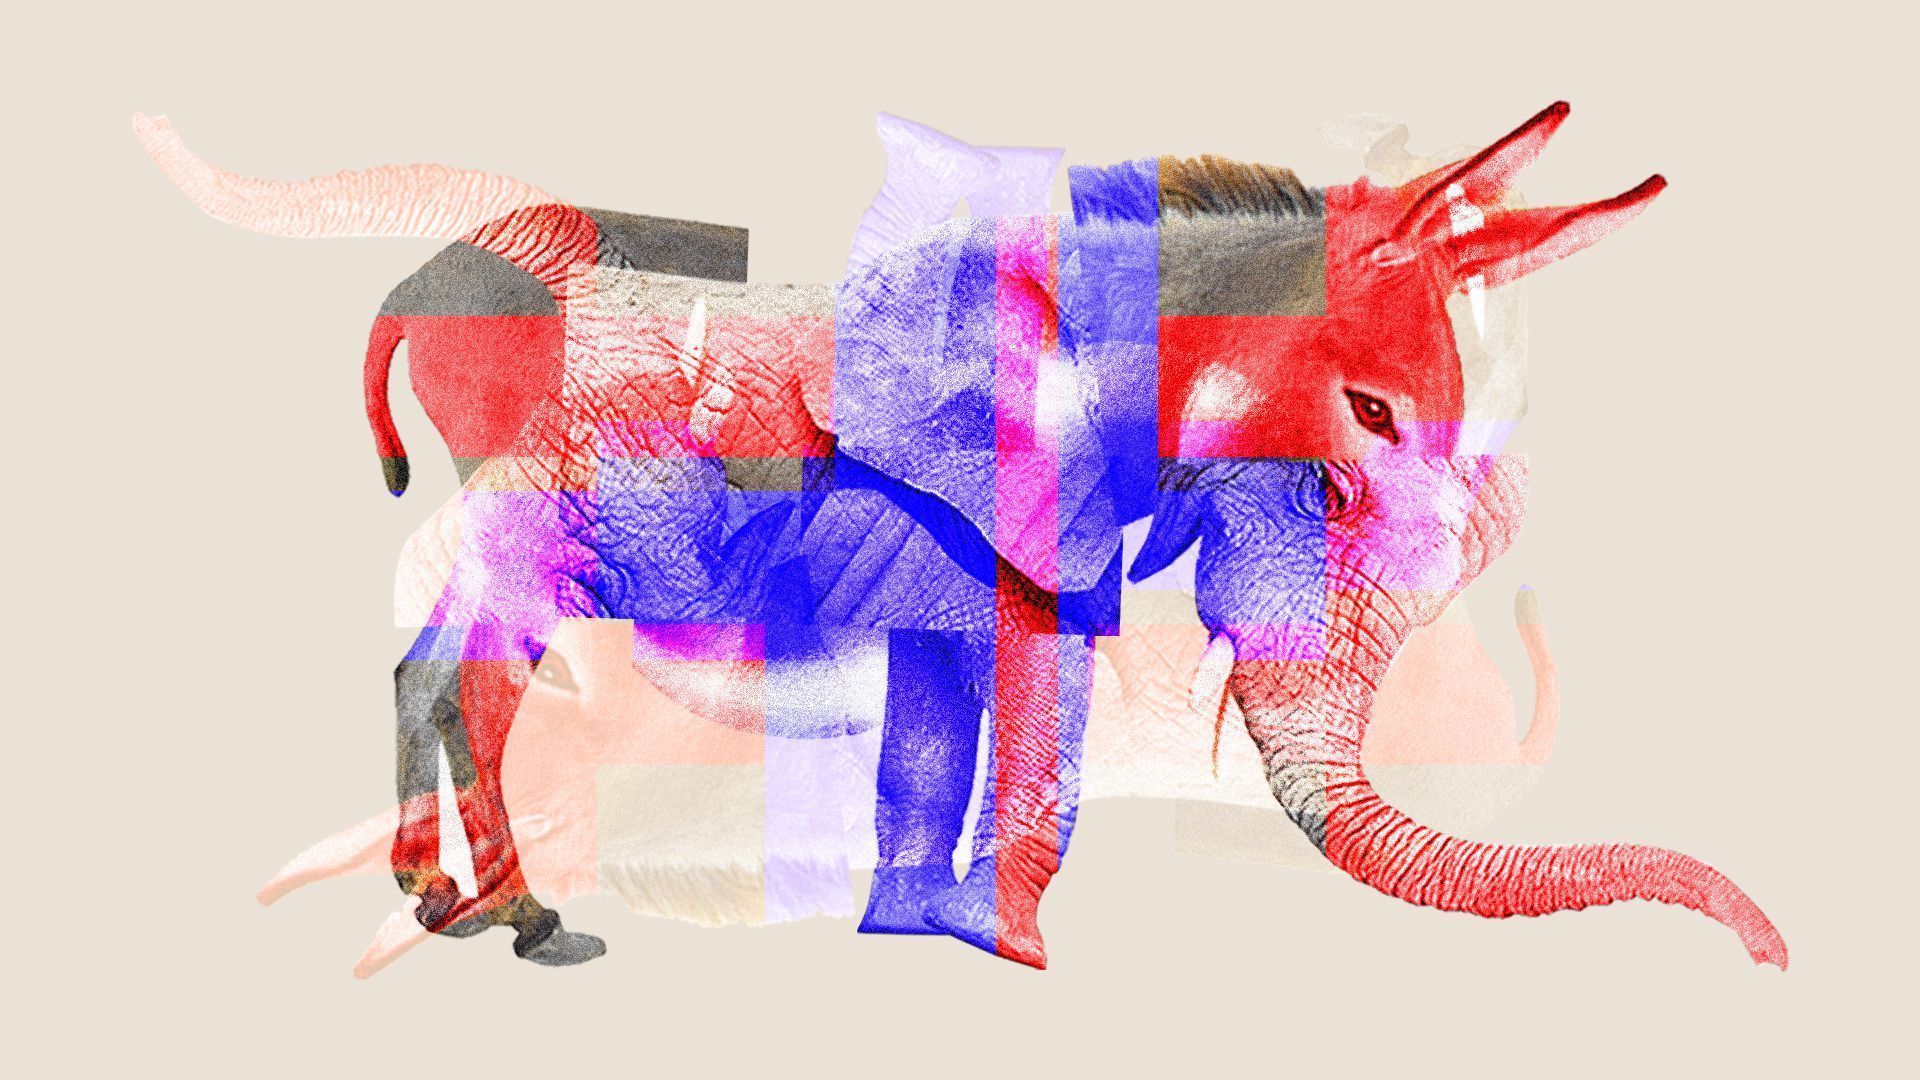 Illustration of a combination of the Republican elephant and Democrat donkey merged.